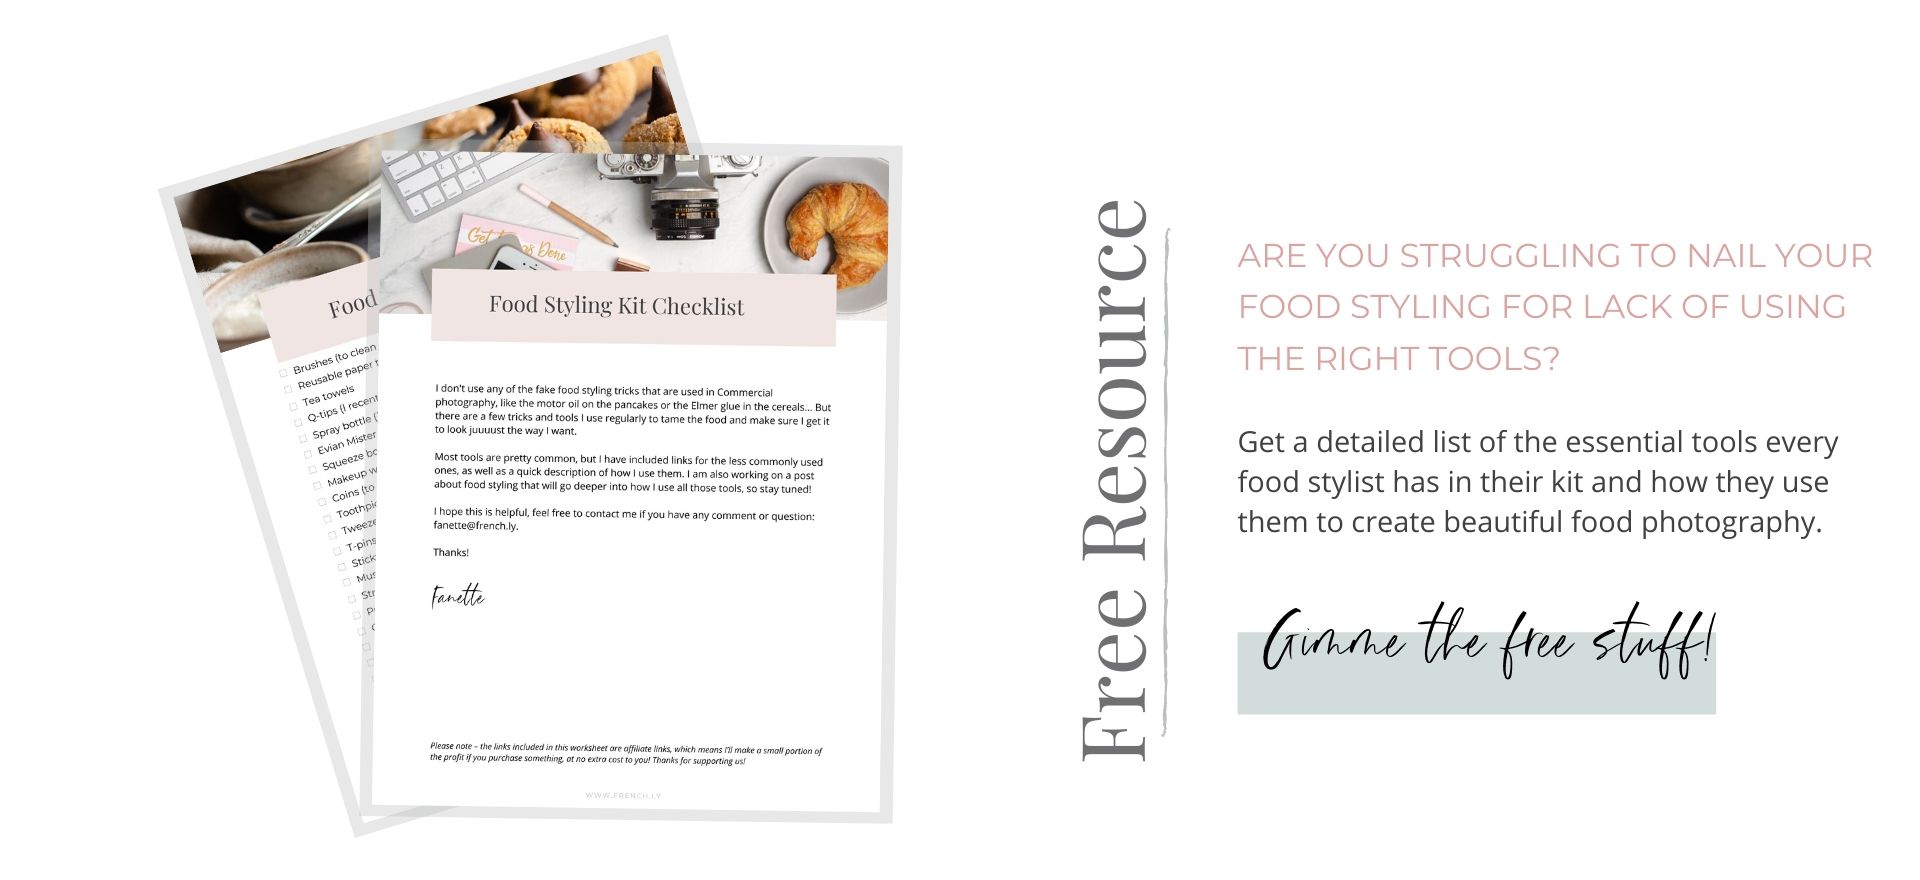 Stunning food photography styling starts with a story! Follow my 6 easy steps to get tantalizingly good images, every time you shoot. And while you’re at it, snag my food styling checklist to make sure you have all the right tools to create beautiful food photography.